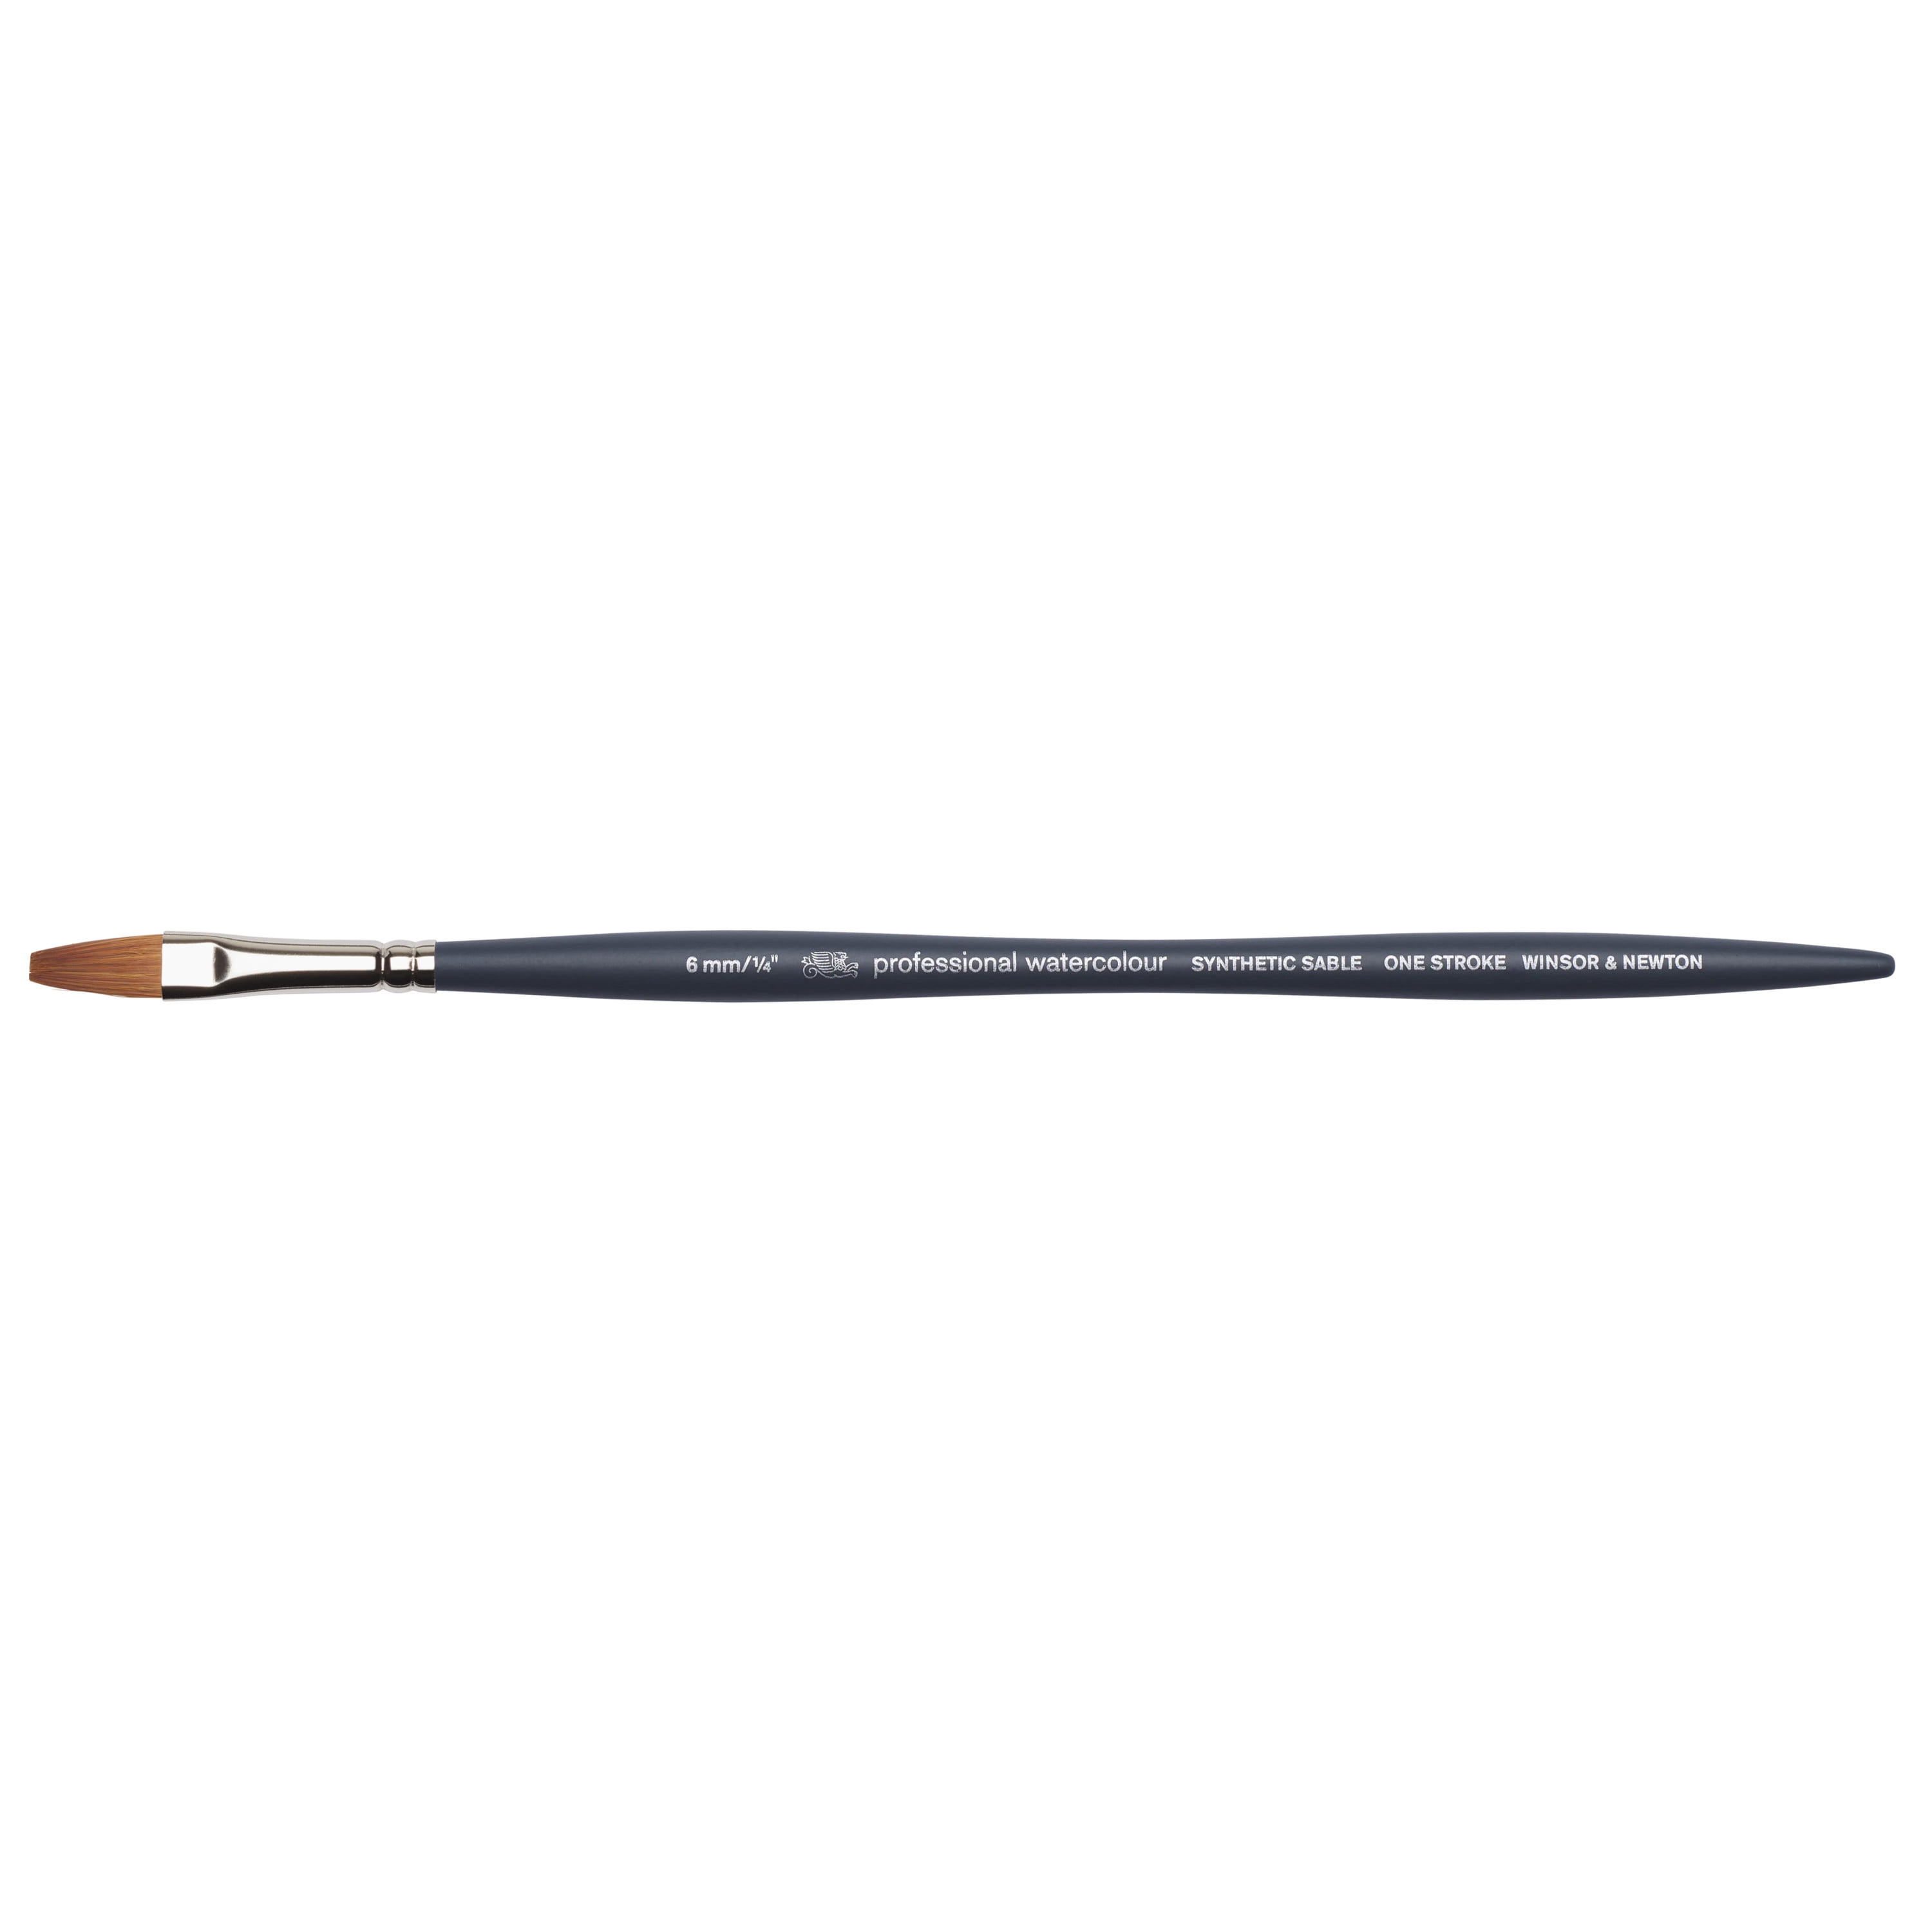 Winsor & Newton Professional Watercolor Synthetic Sable Brush Mop 1/2in